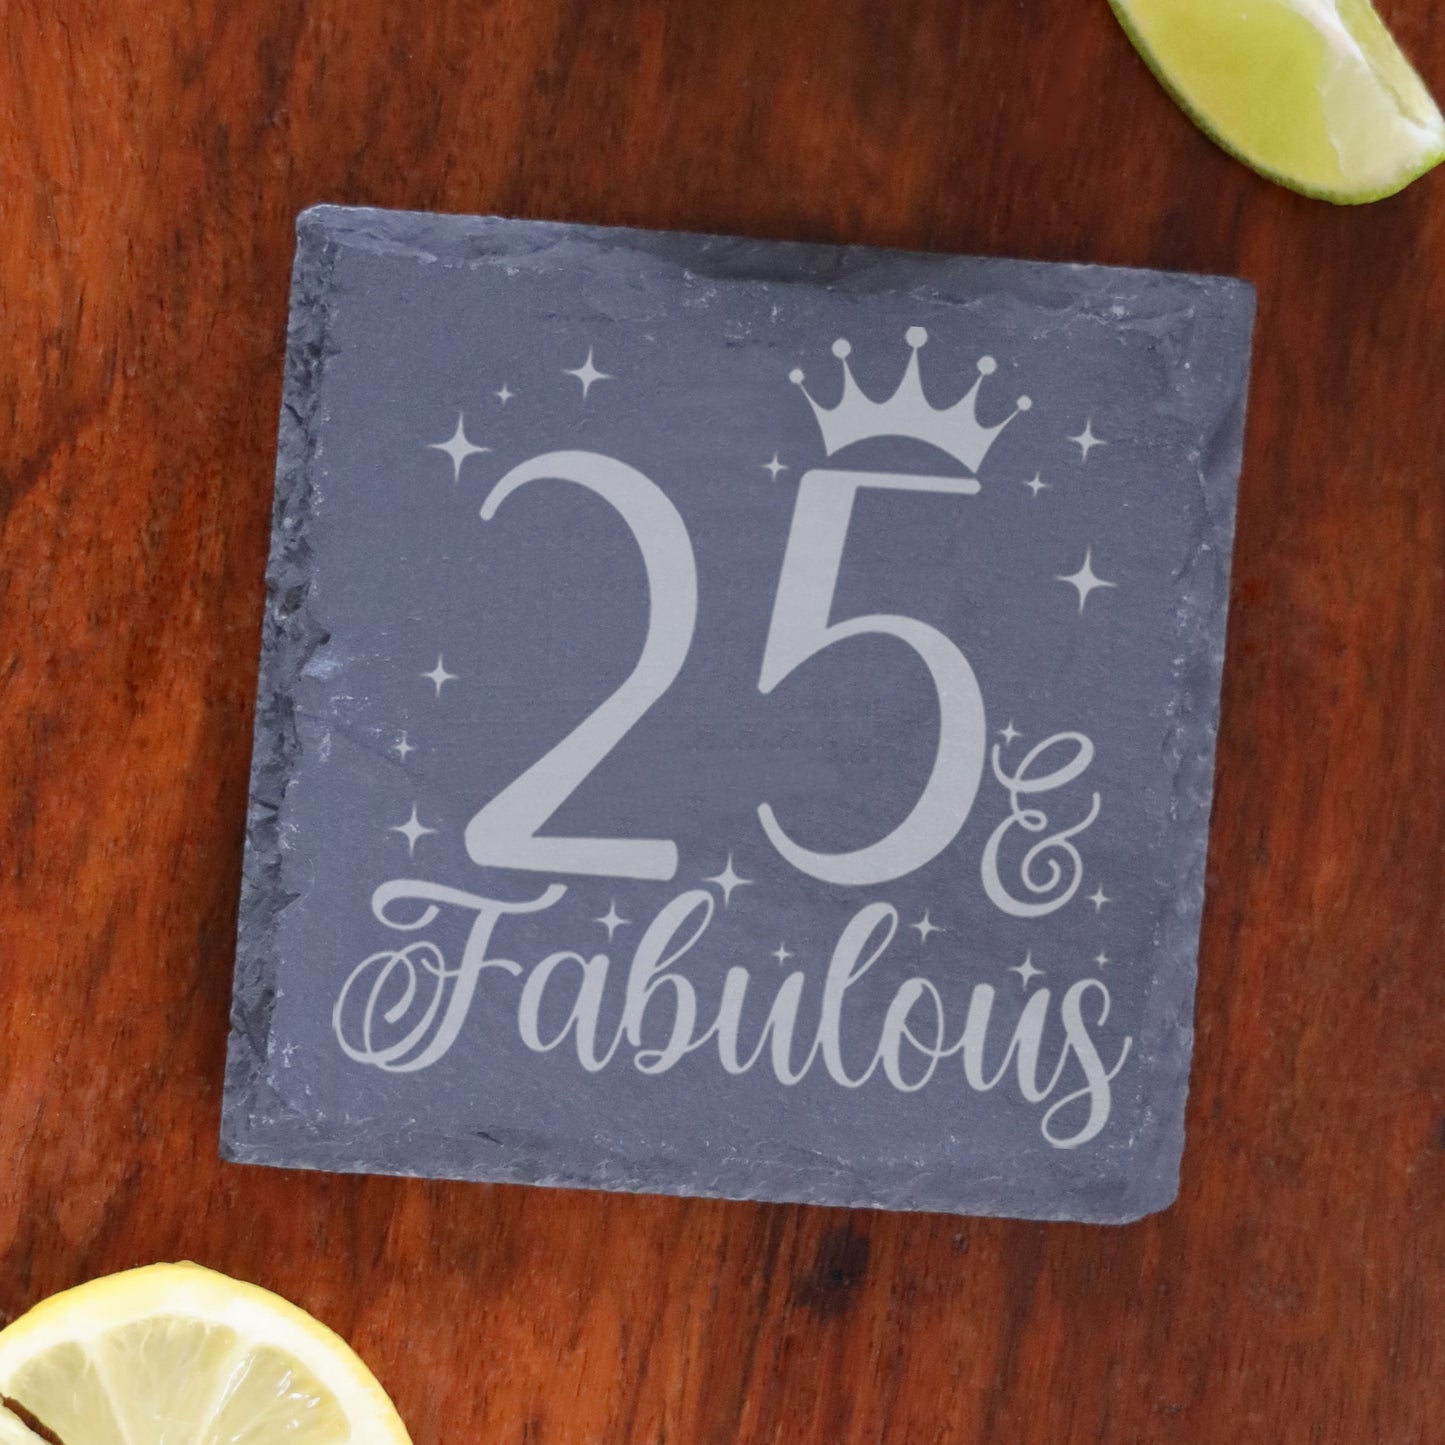 25 & Fabulous 25th Birthday Gift Engraved Wine Glass and/or Coaster Set  - Always Looking Good - Square Coaster Only  